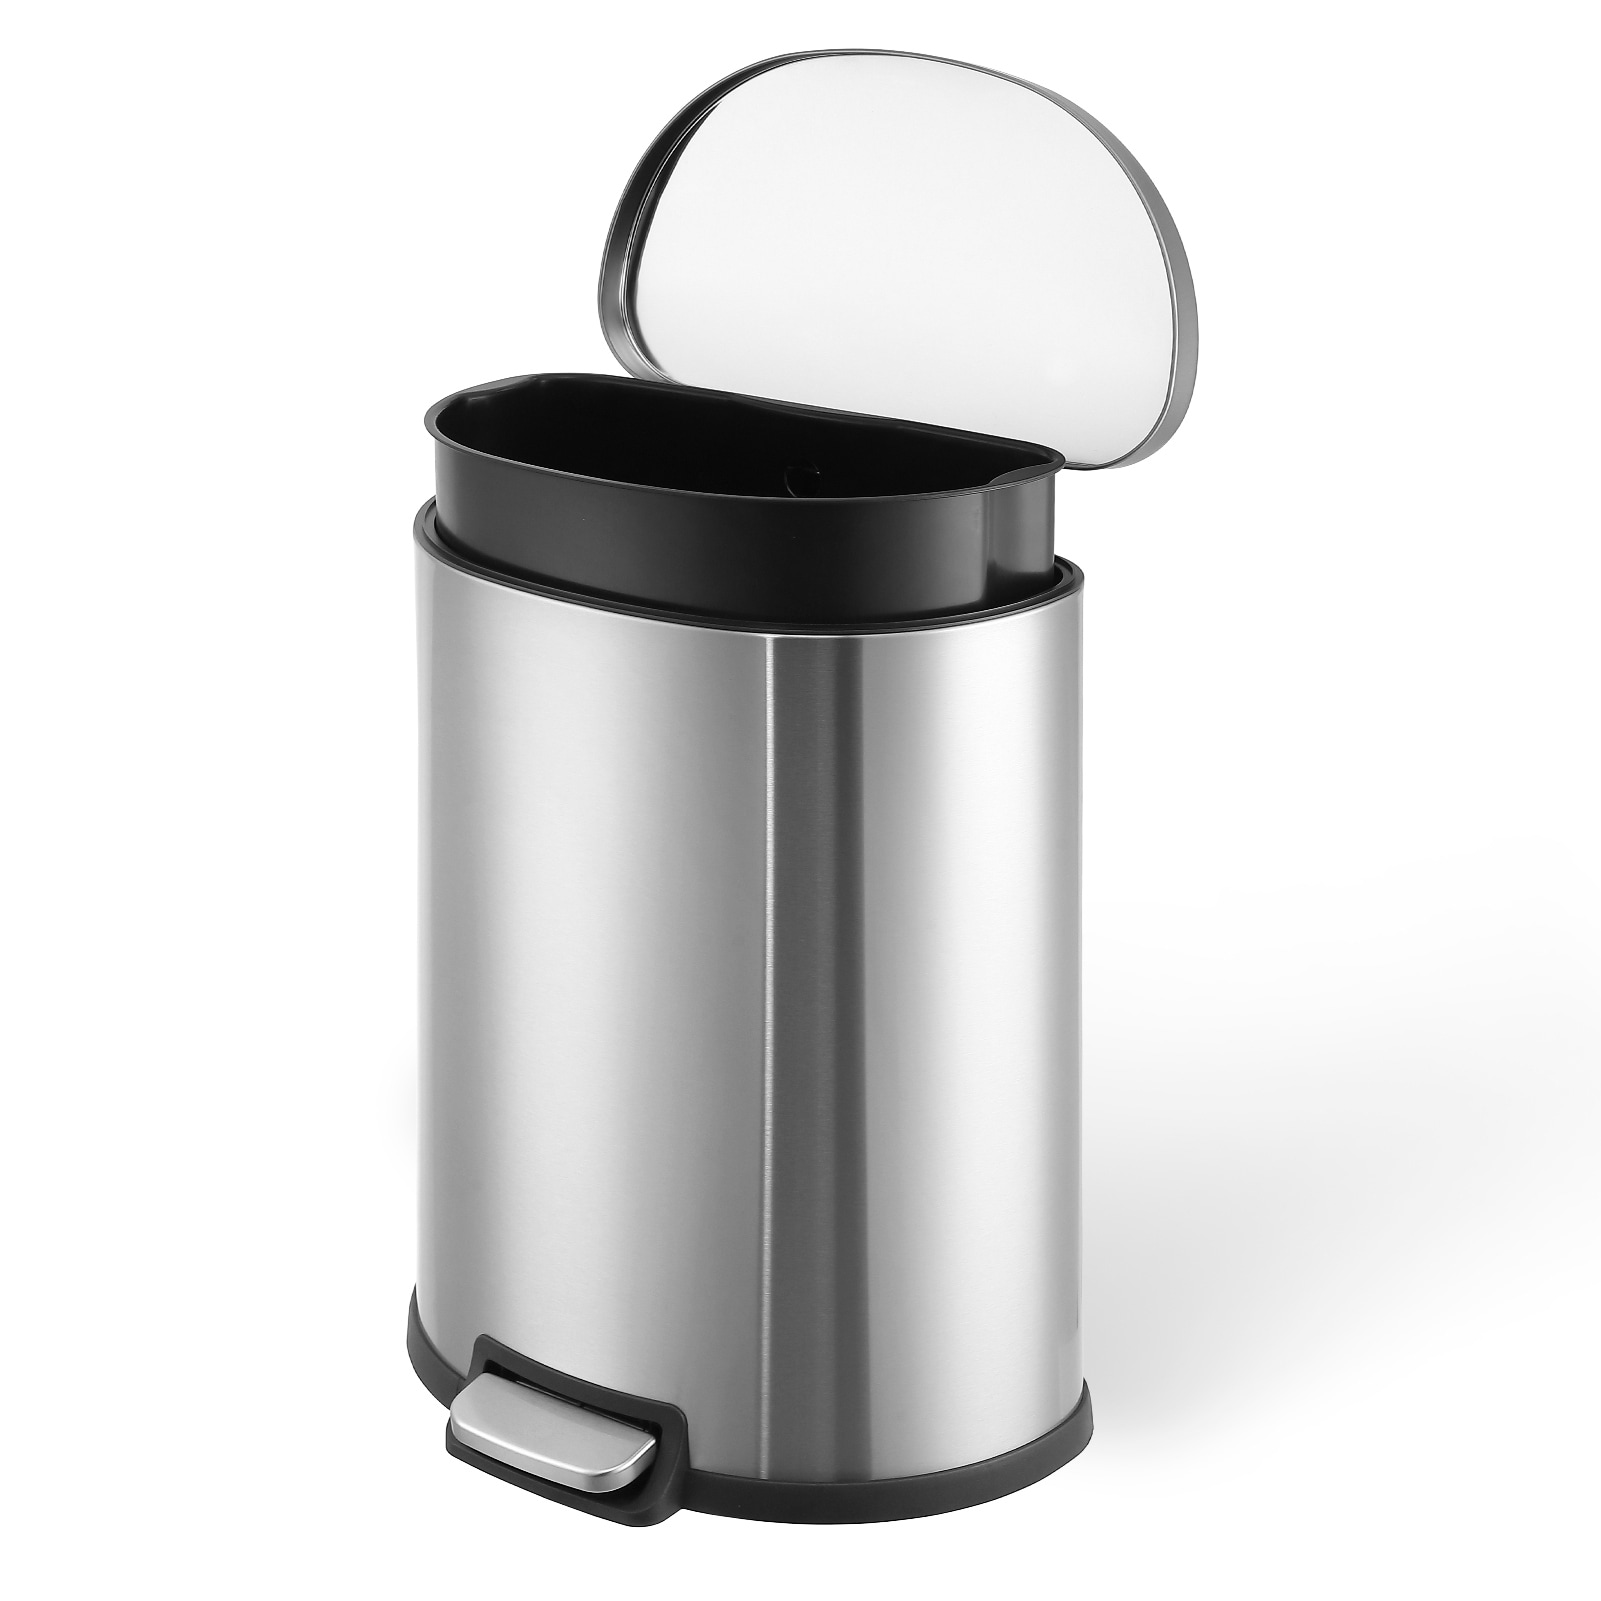 Stainless Steel Trash Can, 50 Liter / 13 Gallon - On Sale - Bed Bath &  Beyond - 38459808